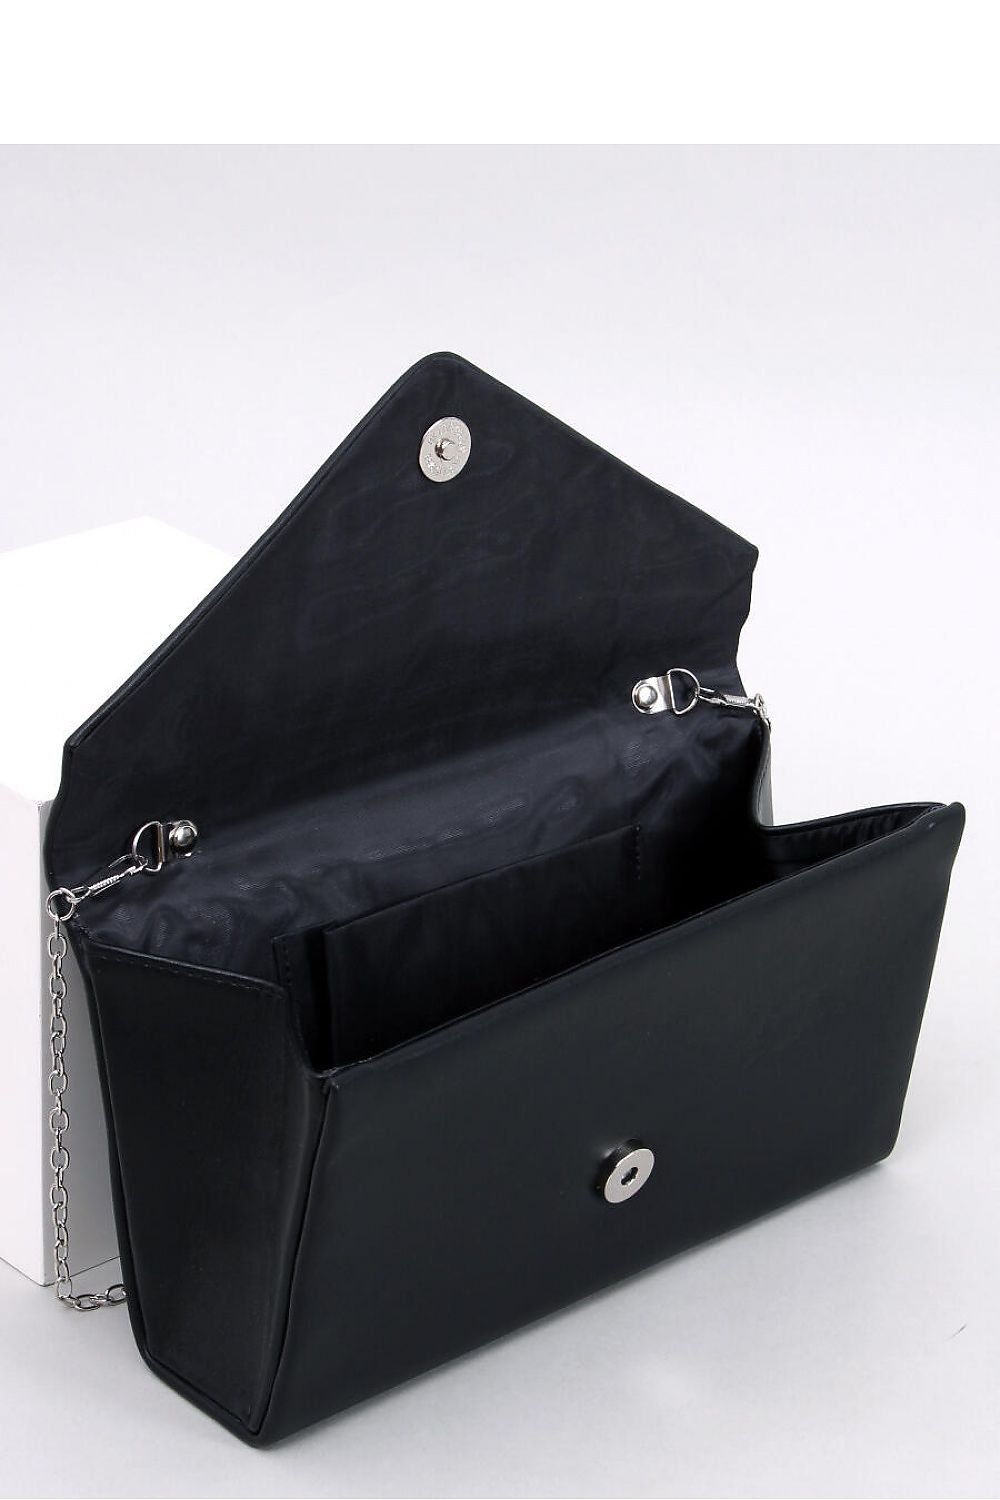 Envelope clutch bag - M&H FashionEnvelope clutch bagM&H FashionM&H Fashion192448_1116840one-size-fits-allEnvelope clutch bag InelloM&H FashionM&H FashionElegant handbag for women ? clutch bag. It can be carried in two ways ? in hand or on a silver chain attached to it. The unique beauty of the handbag lies in the claEnvelope clutch bag